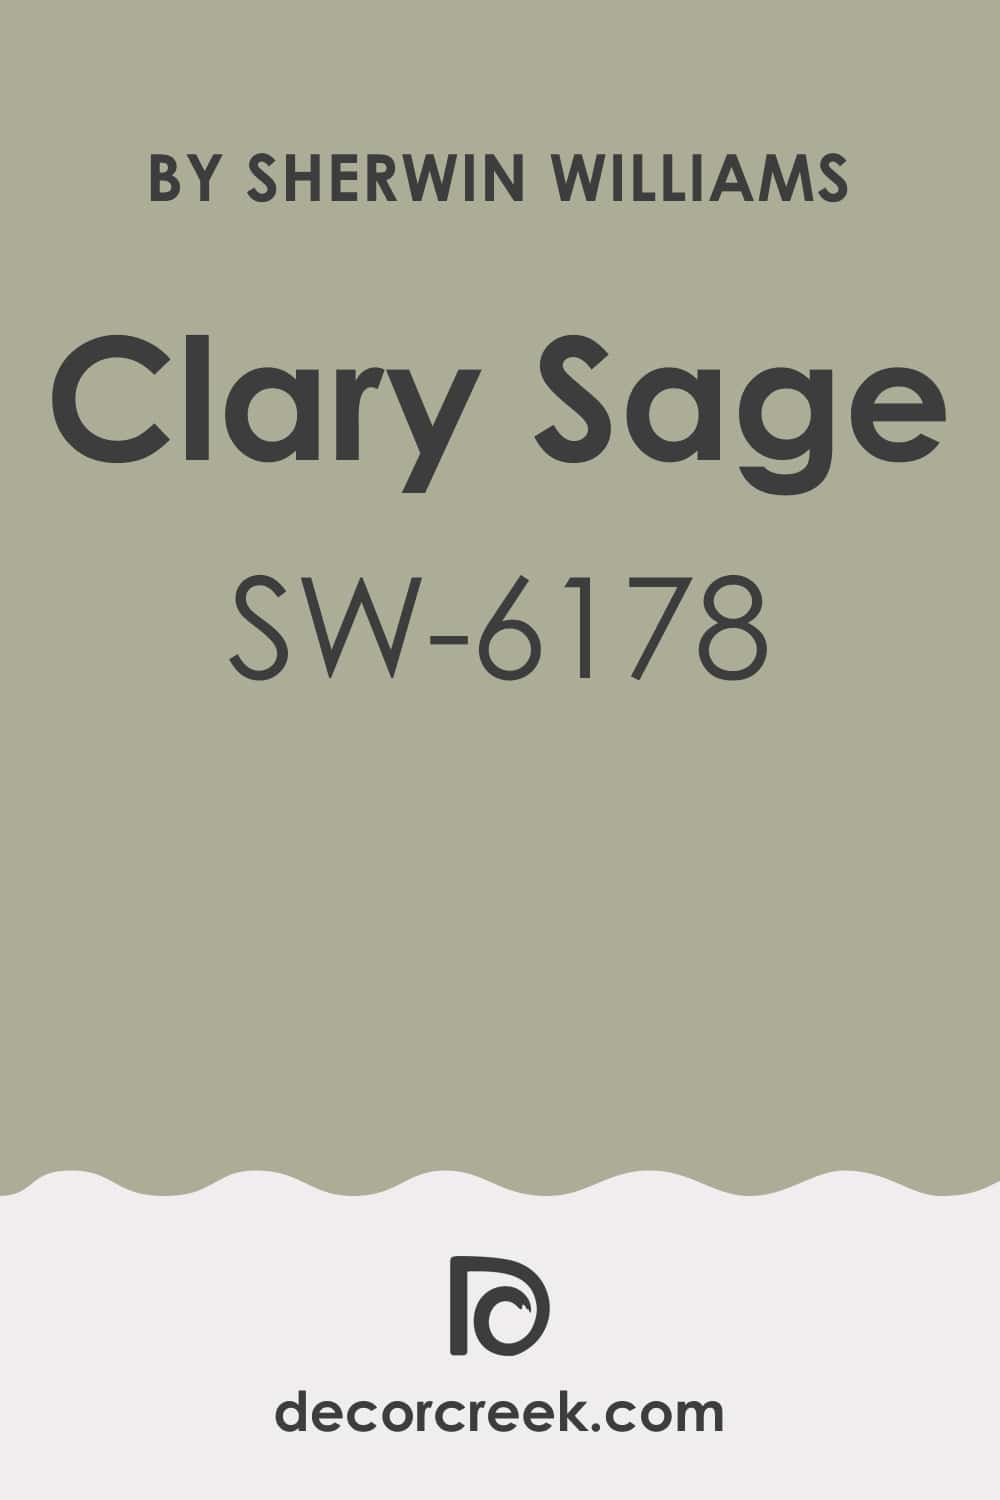 What Kind of Color Is Clary Sage SW-6178?